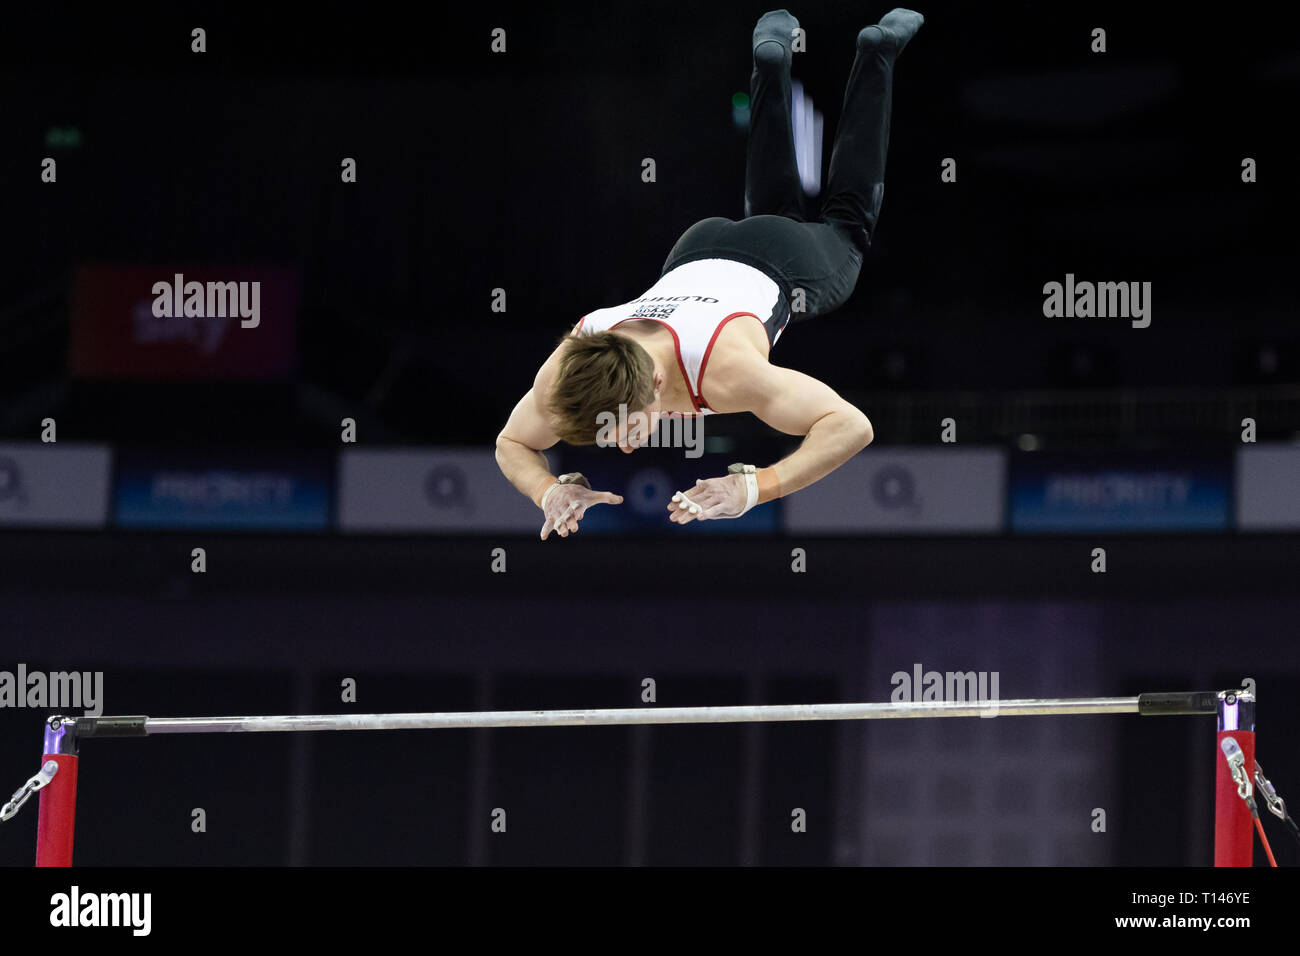 London, UK. 23rd March, 2019. Sam Oldham performs High Bar during the Matchroom Multisport presents the 2019 Superstars of Gymnastics at The O2 Arena on Saturday, 23 March 2019. LONDON ENGLAND. Credit: Taka G Wu/Alamy News Stock Photo